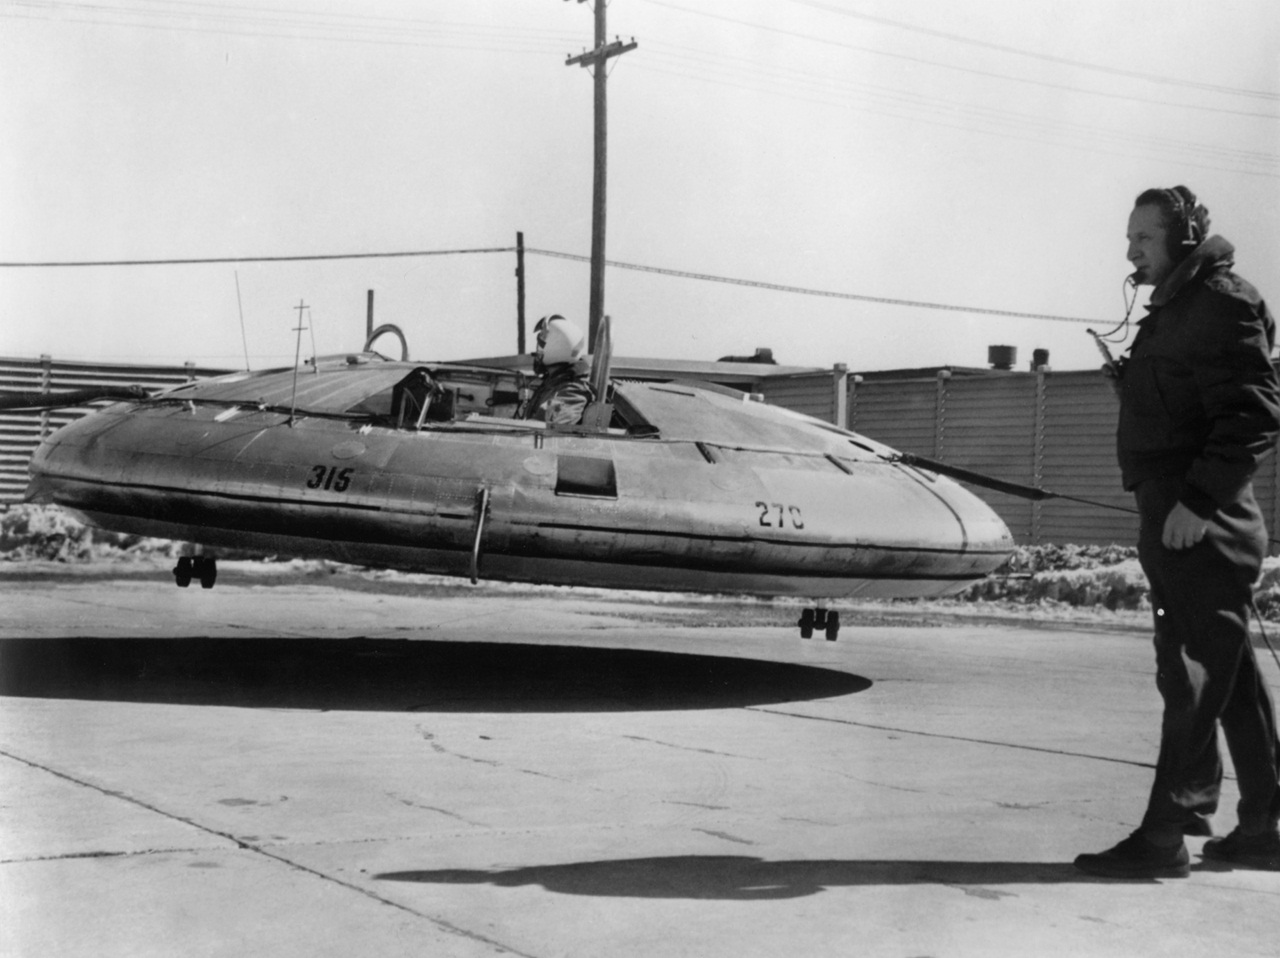 Before free-flight tests, the Avrocar was flown with tethers, seen here in front and behind the aircraft, for safety reasons. (U.S. Air Force photo)